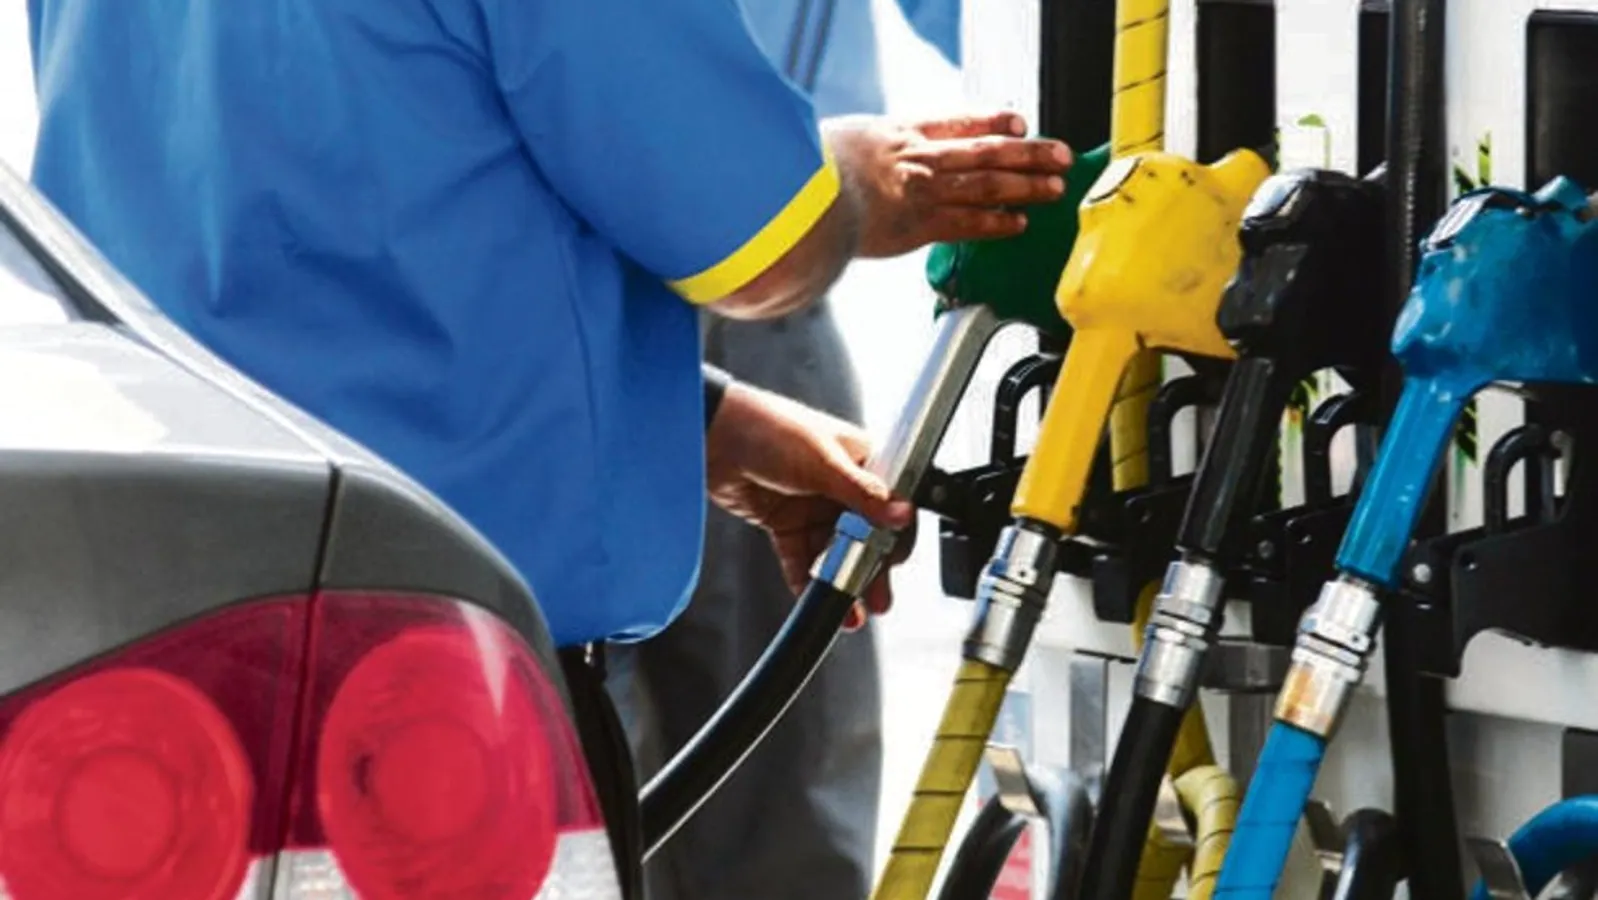 Retail prices of petrol, diesel may not be cut due to volatile oil market